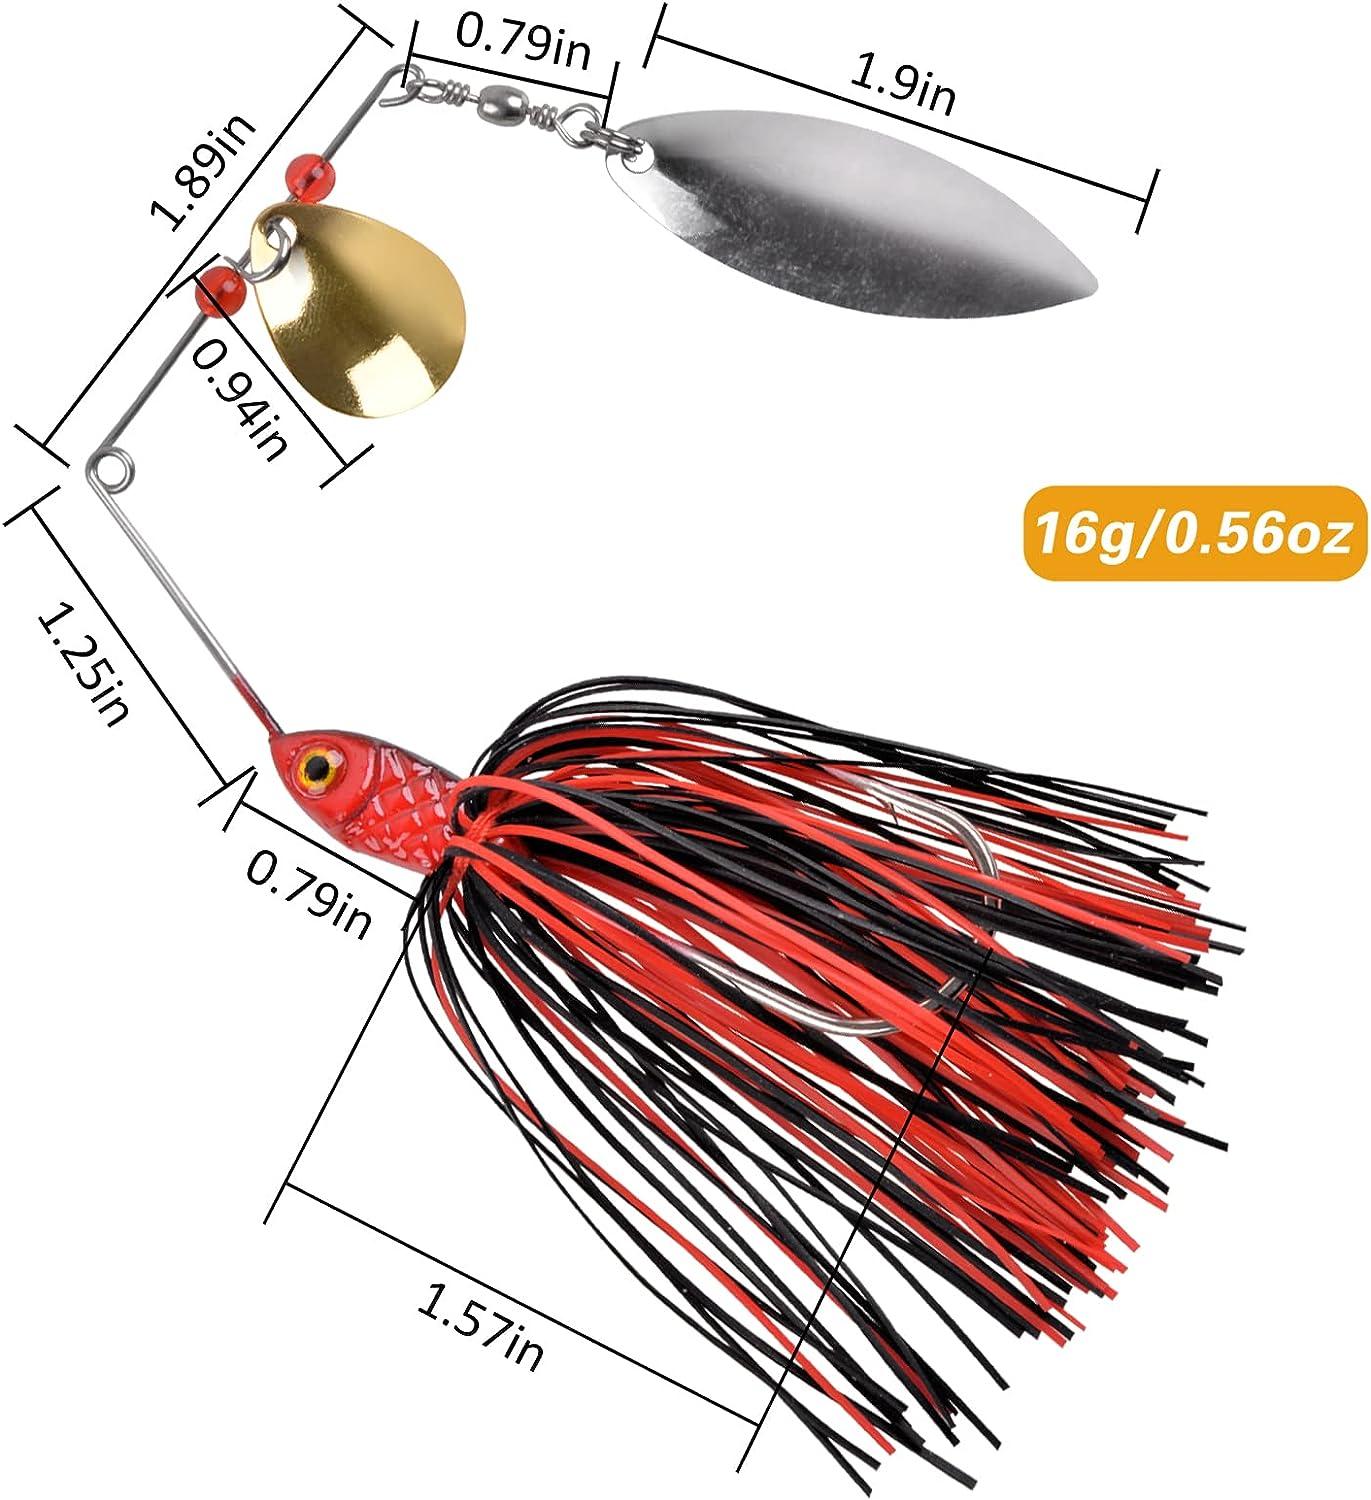 Fishing Lure, Hard Metal Jig Spinner Baits Kits Swimbait For Bass Trout  Pike